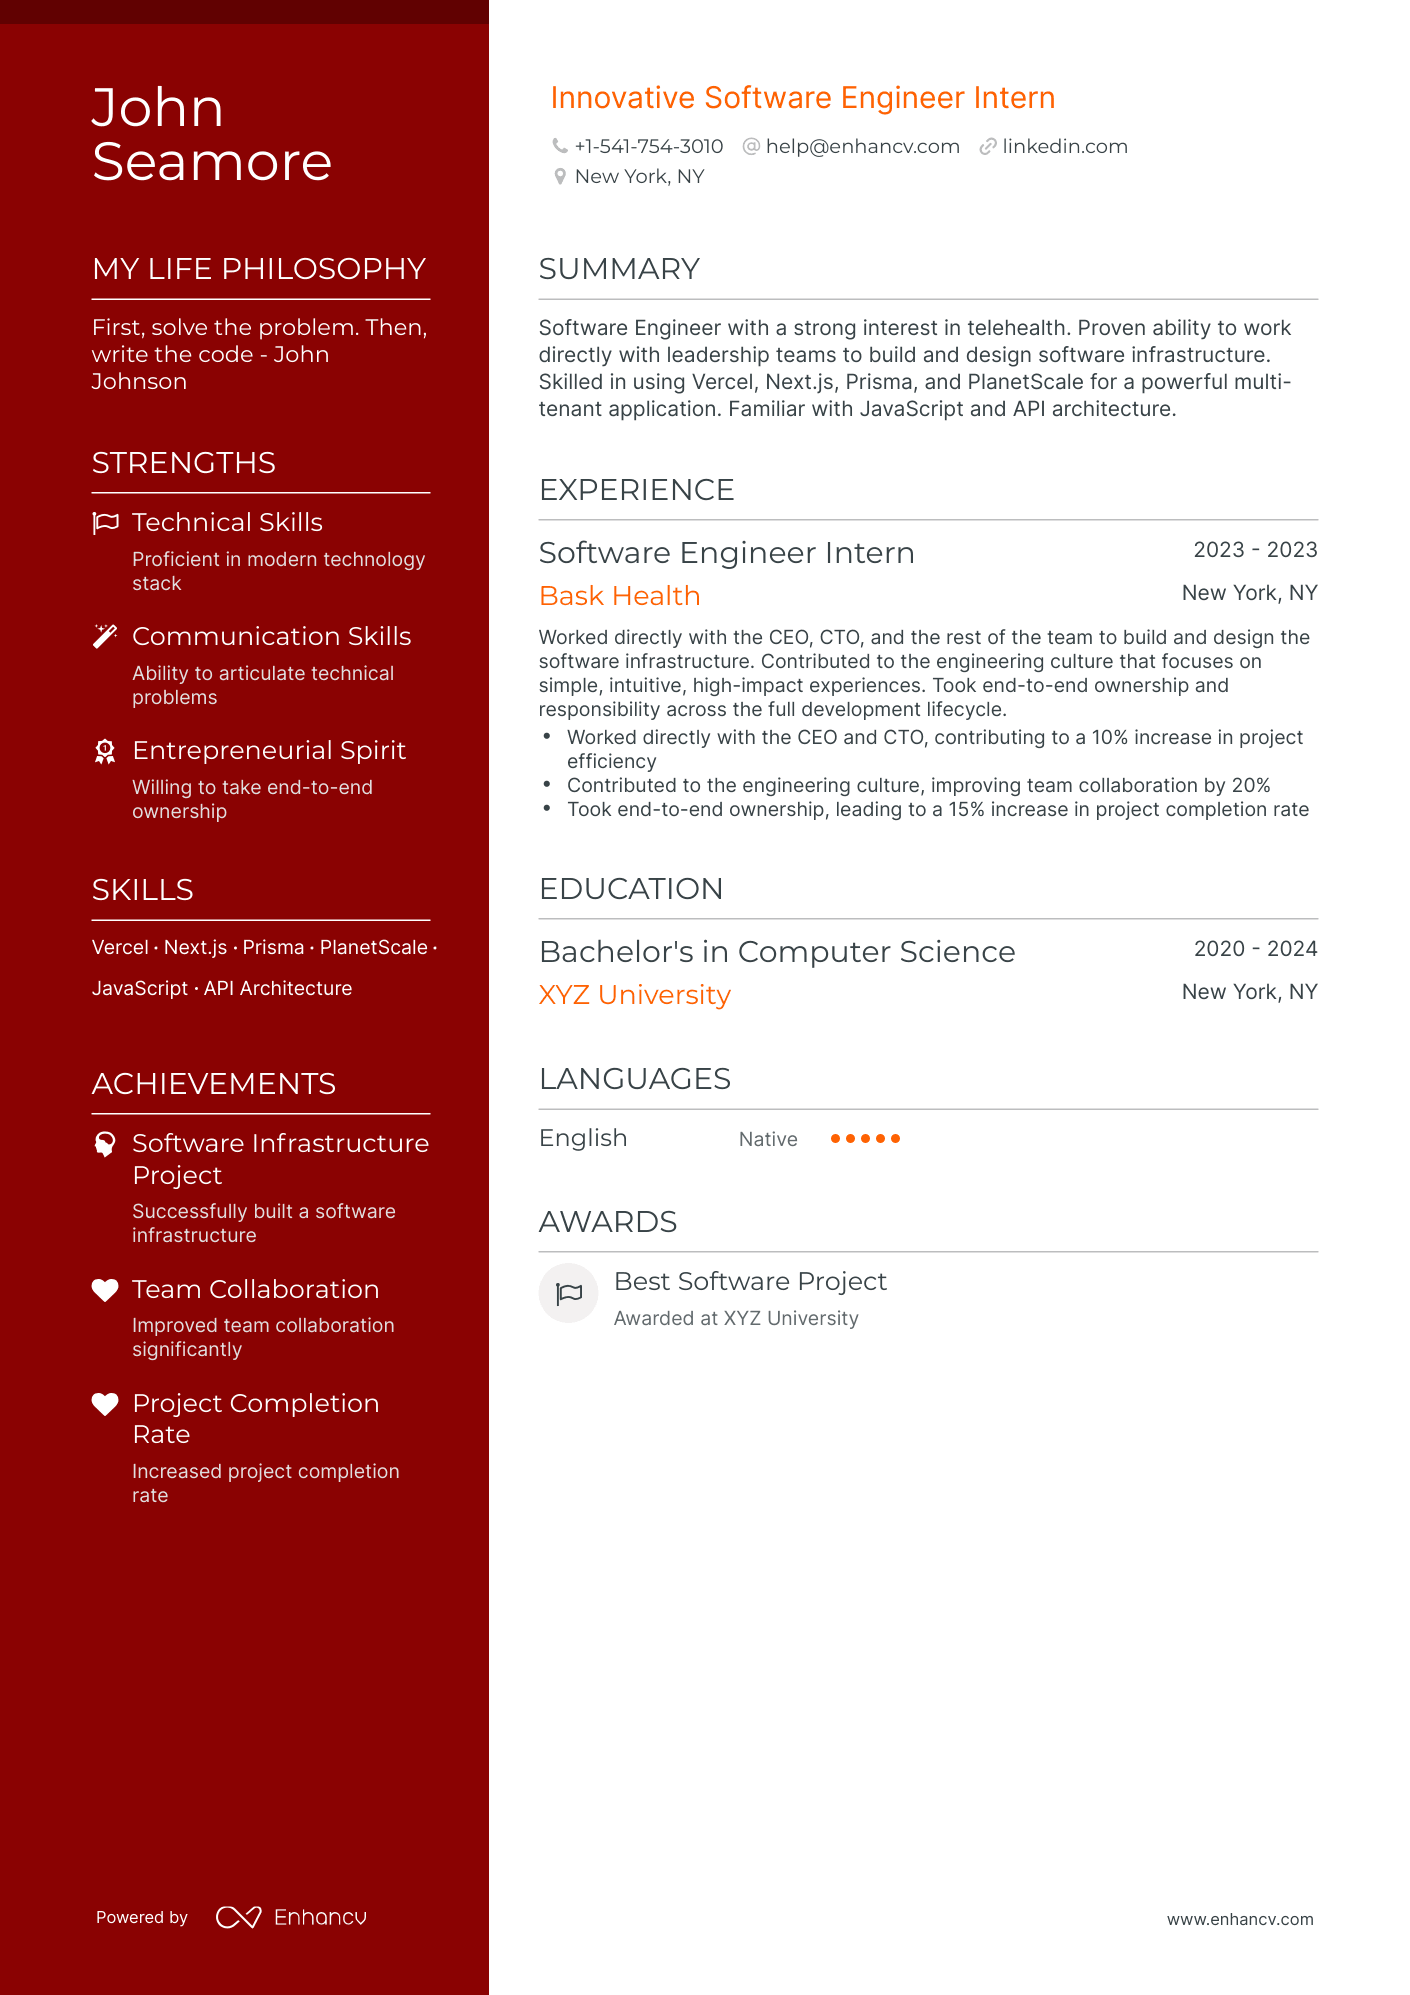 Polished Software Engineer Intern Resume Template